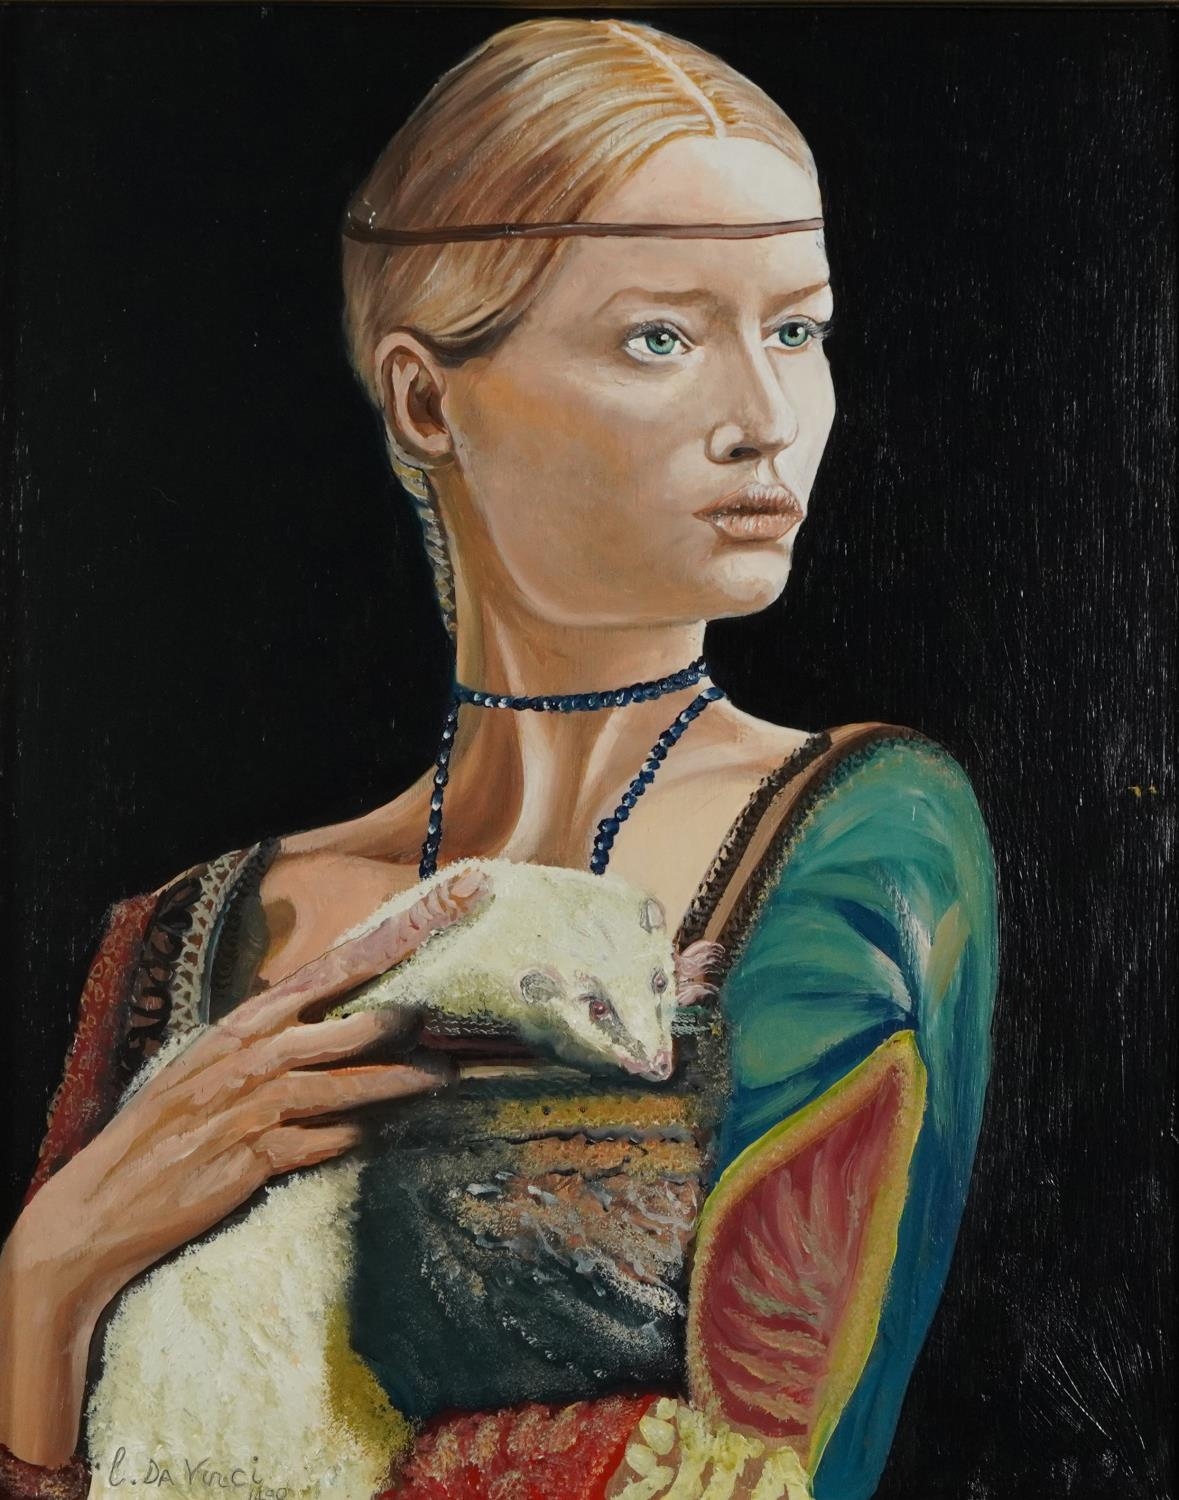 Clive Fredriksson, After Leonardo da Vinci, Lady with an ermine, oil on board, housed in a